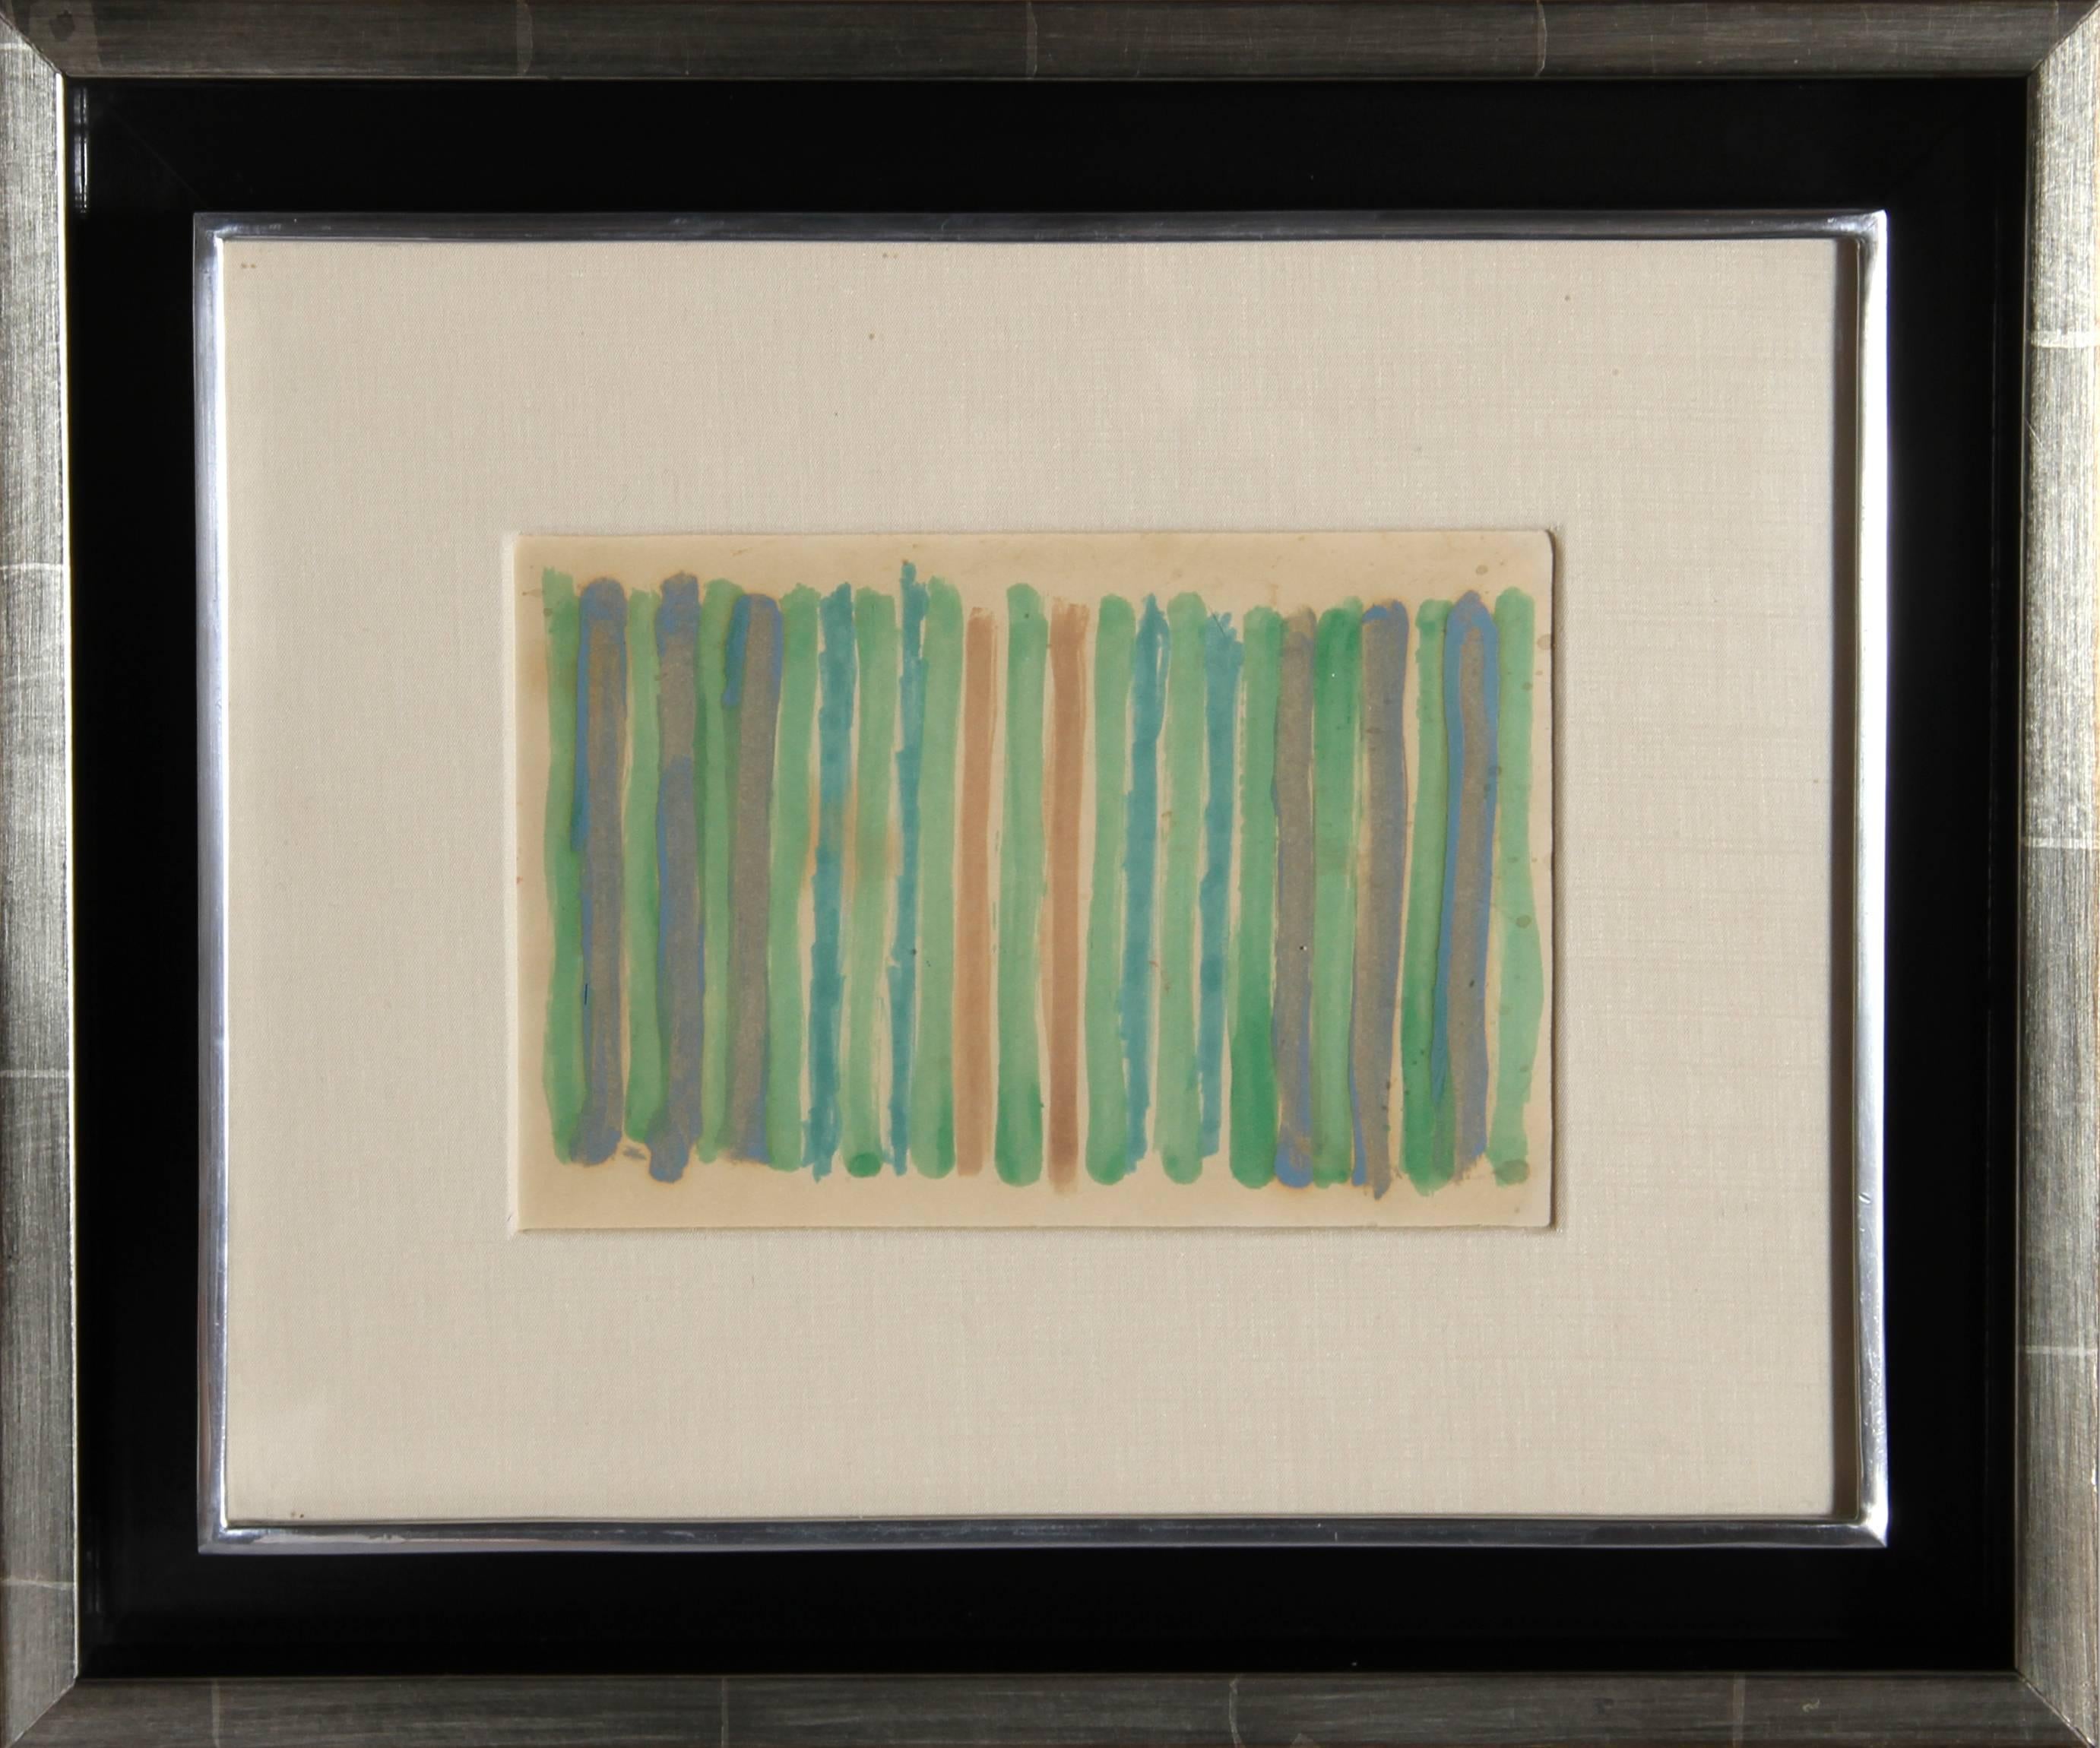 Artist: Kenneth Noland, American (1924 - 2010)
Title: Stripes
Year: circa 1965
Medium: Watercolor
Size: 4.5 in. x 6.75 in. (11.43 cm x 17.15 cm)
Frame Size: 11.5 x 13.5 inches